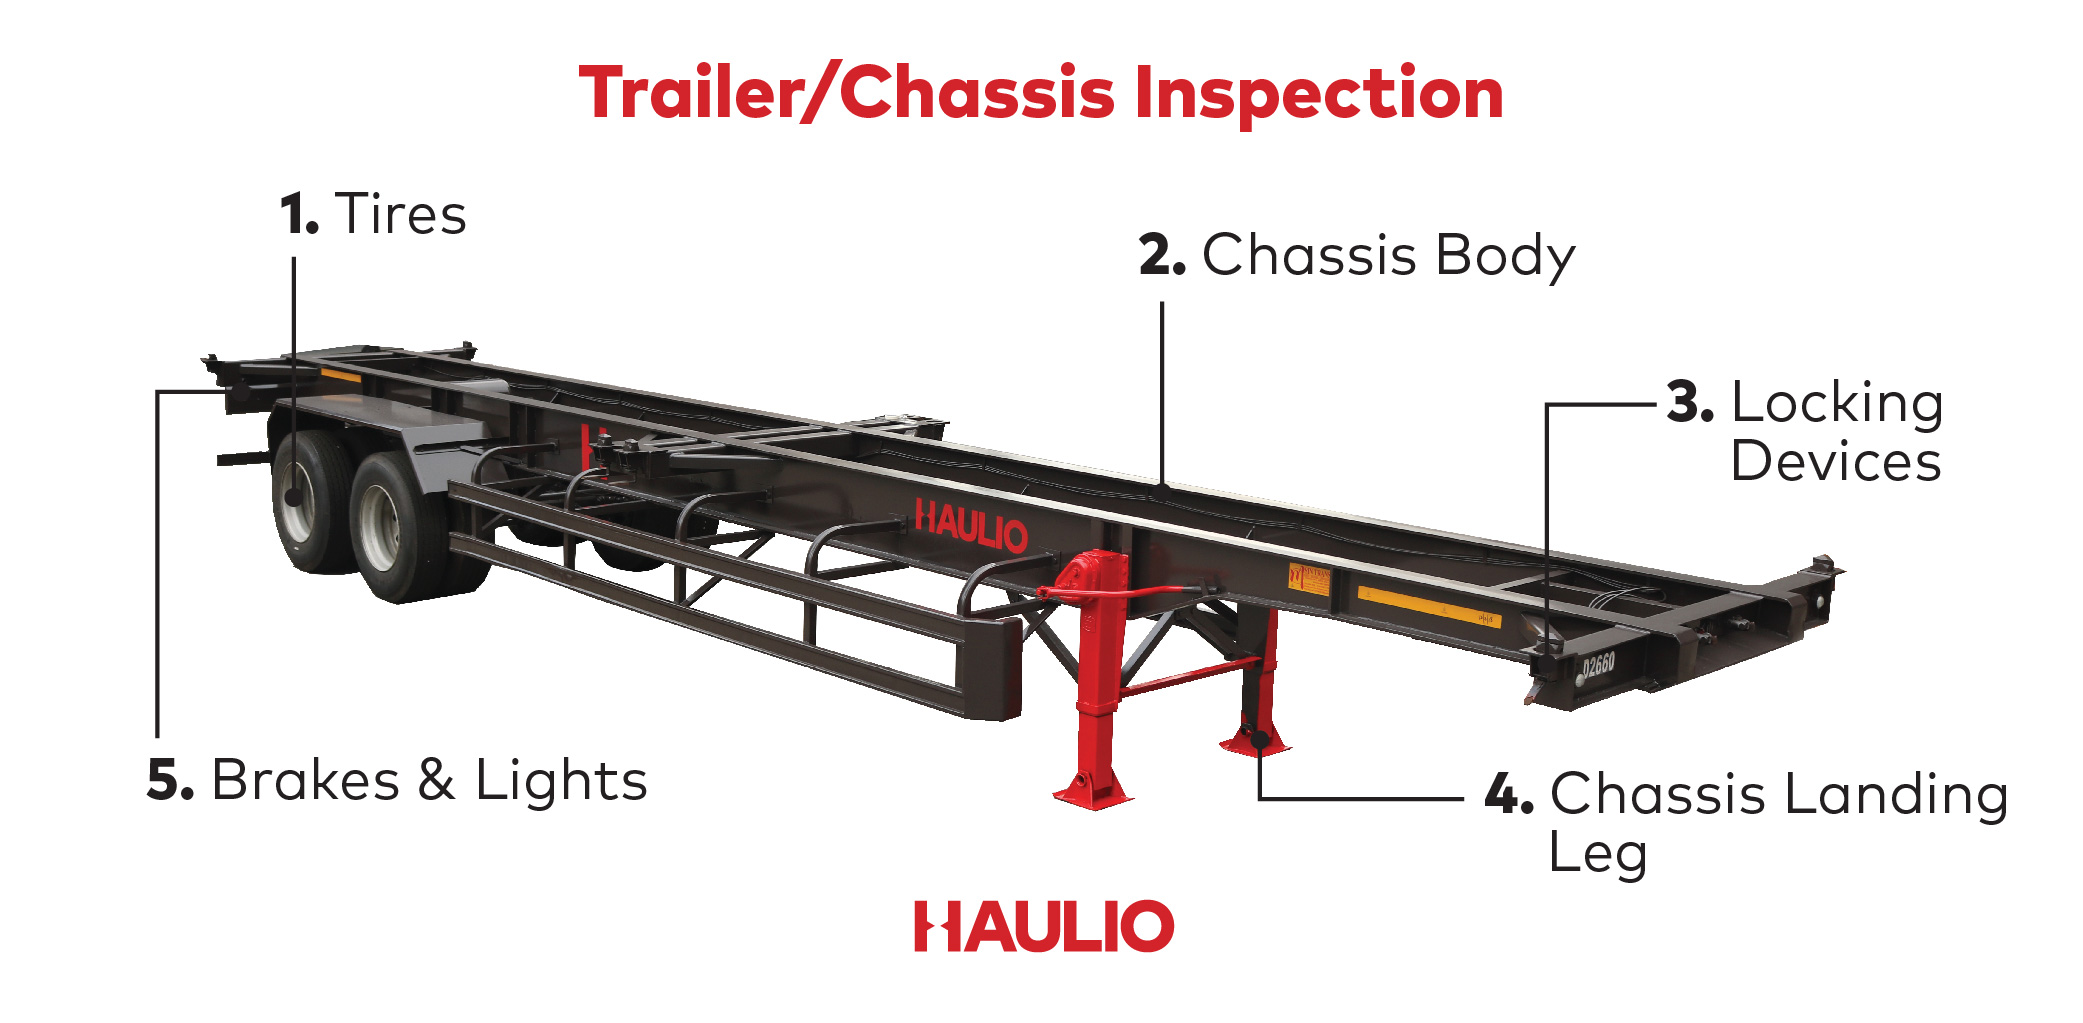 Trailer/Chassis Inspection Checklist